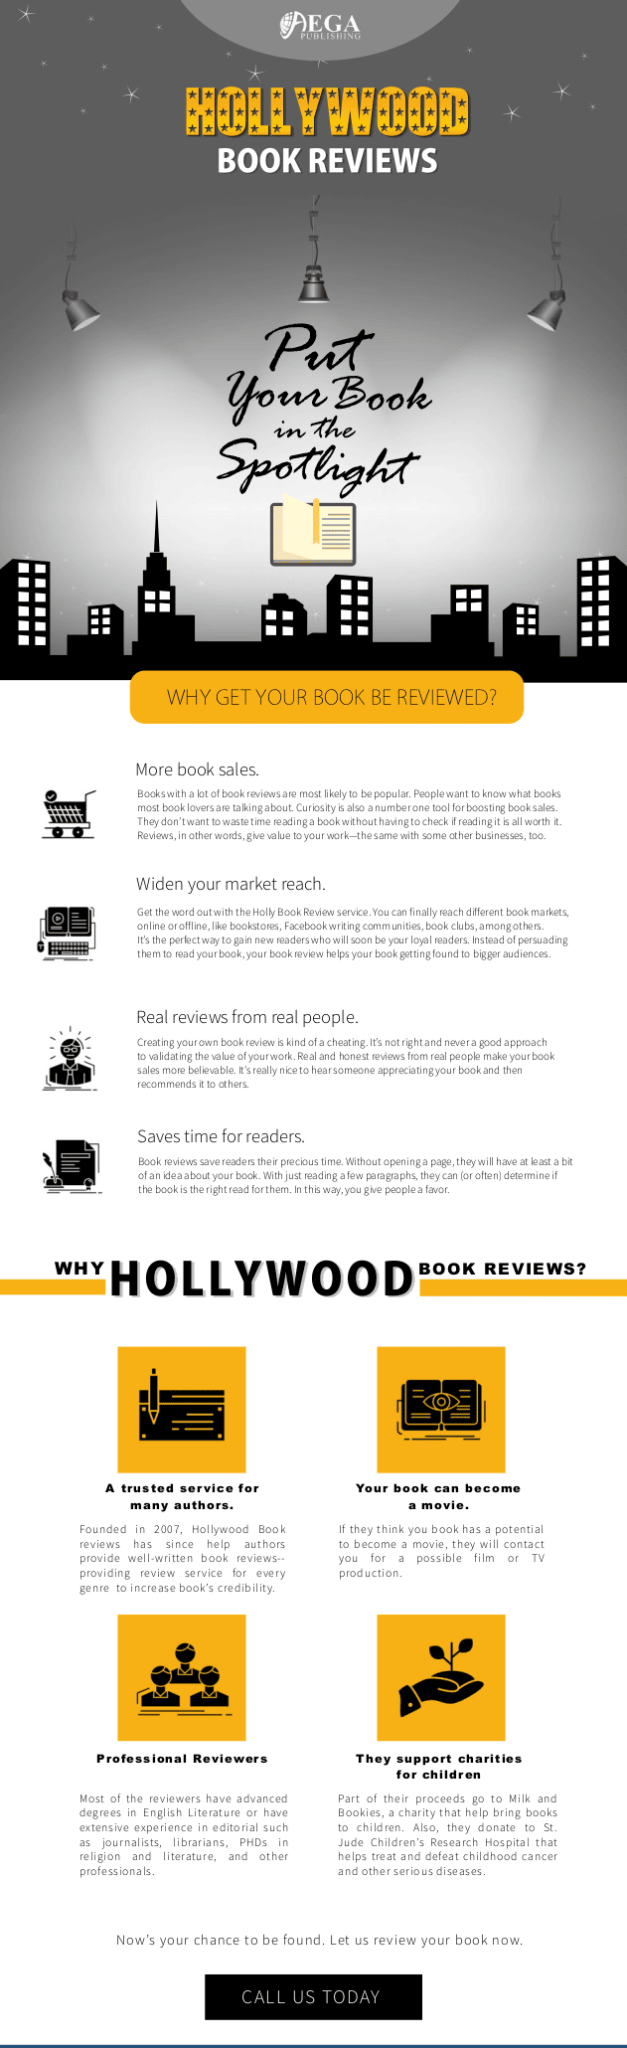 HollywoodBookReview